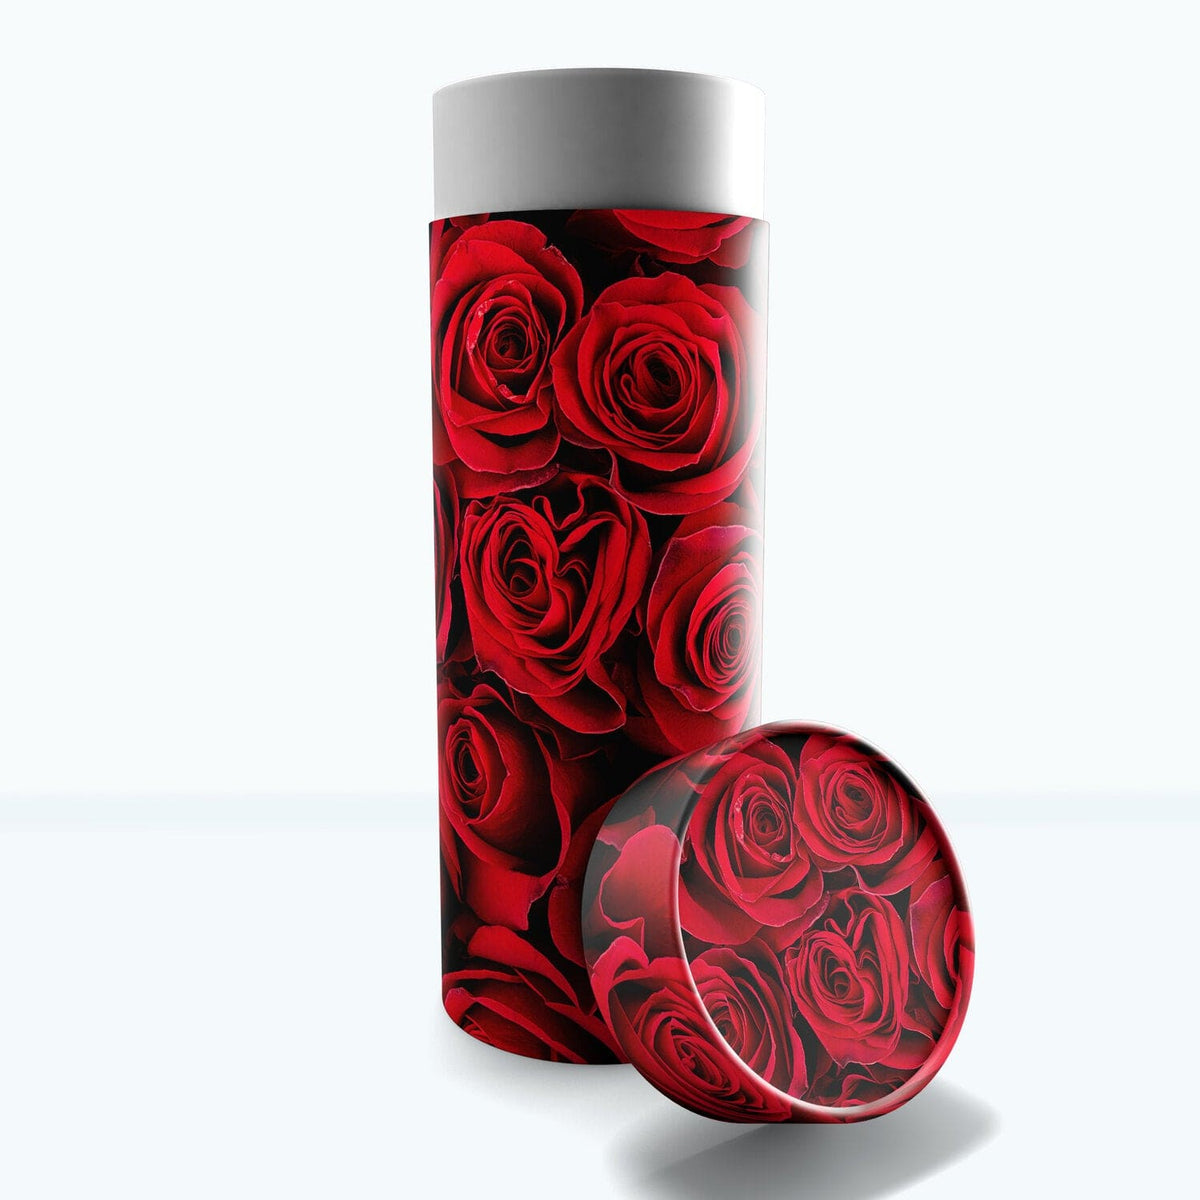 Commemorative Cremation Urns Small Crimson Rose Biodegradable &amp; Eco Friendly Burial or Scattering Urn / Tube